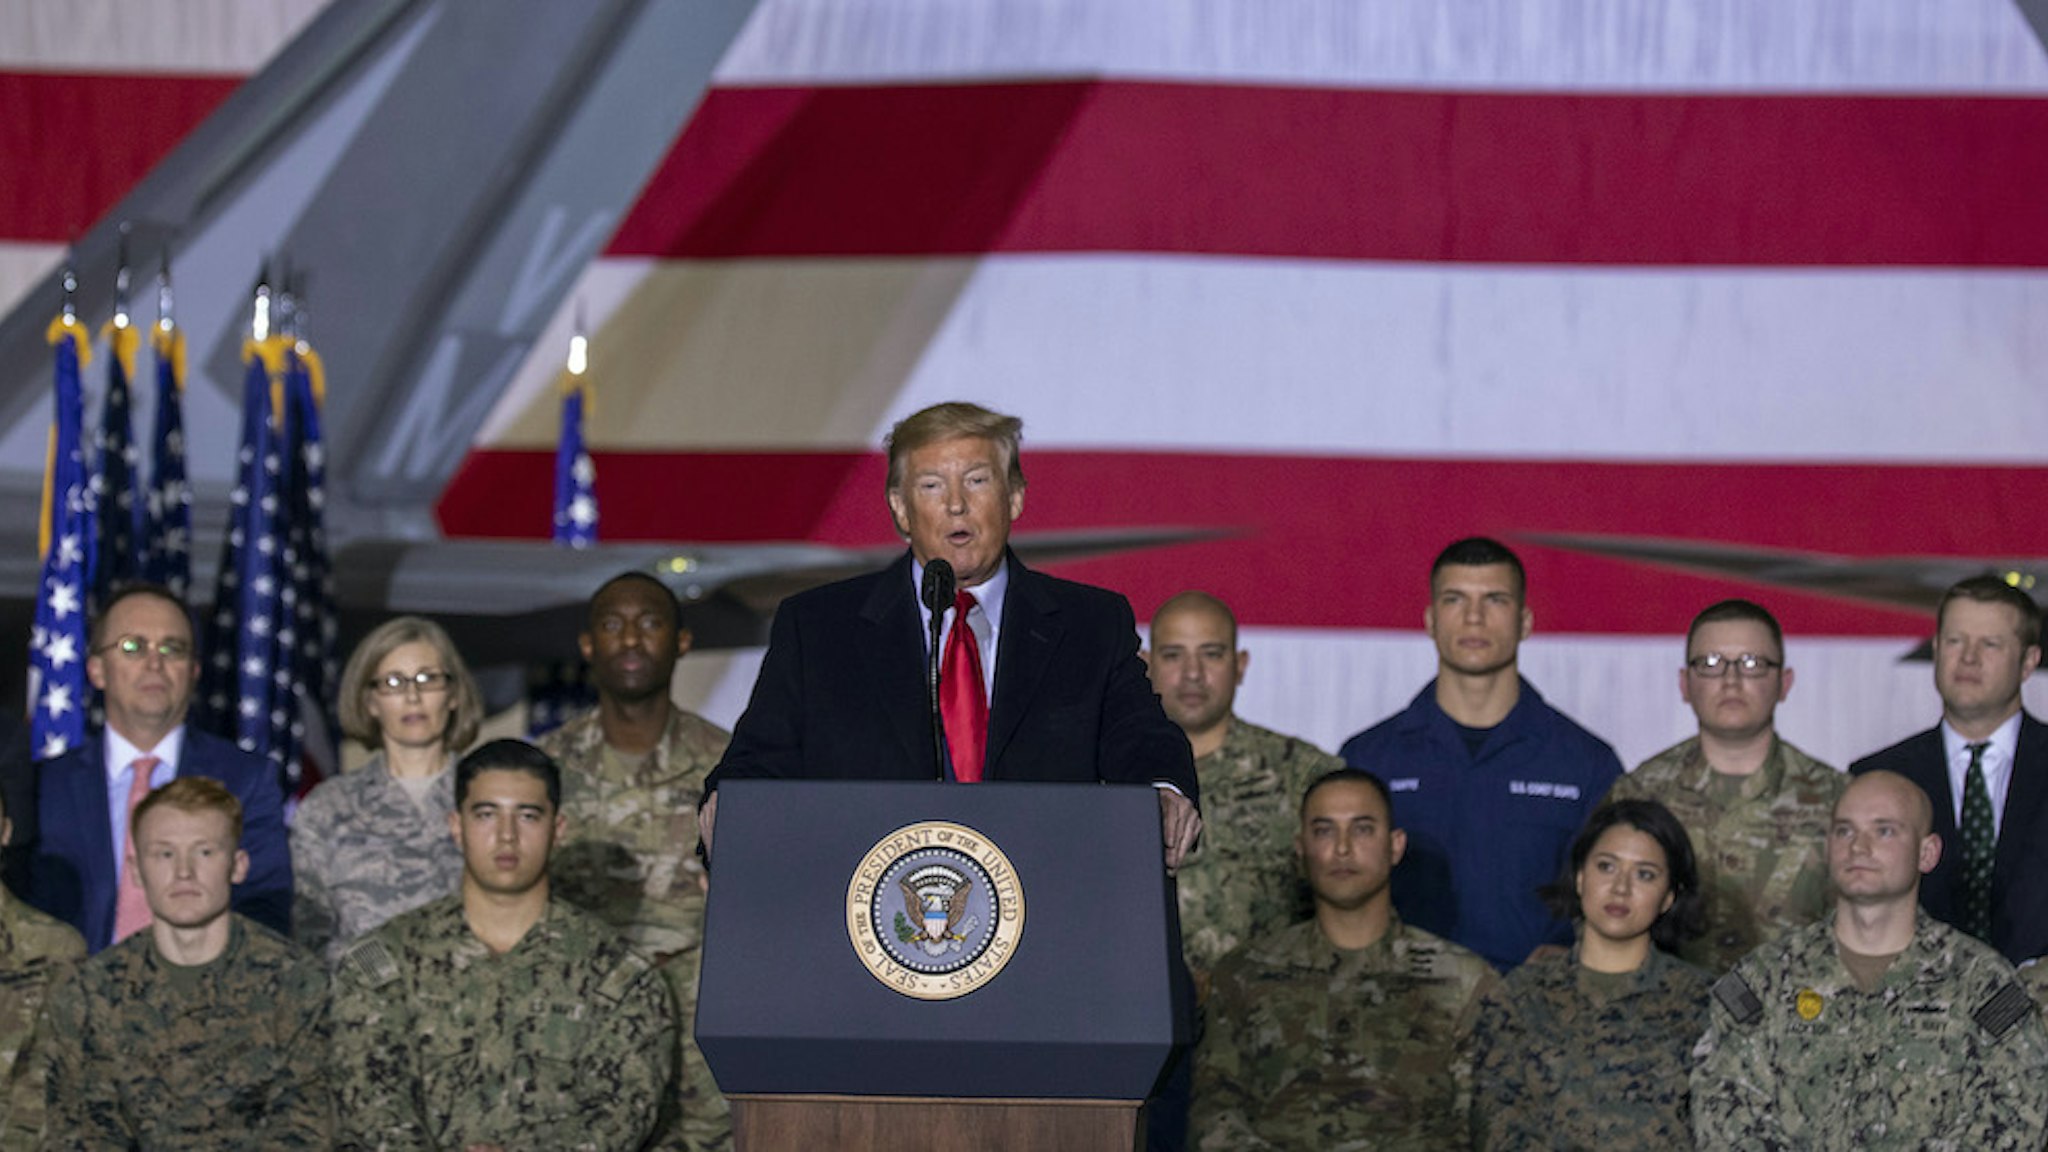 US President Donald Trump speaks at the signing ceremony for S.1709, The National Defense Authorization Act for Fiscal Year 2020 on December 20, 2019 in Joint Base Andrews, Maryland. President Trump is headed to Florida for the Holidays after a historic impeachment vote on the house floor this week. (Photo by Tasos Katopodis/Getty Images)